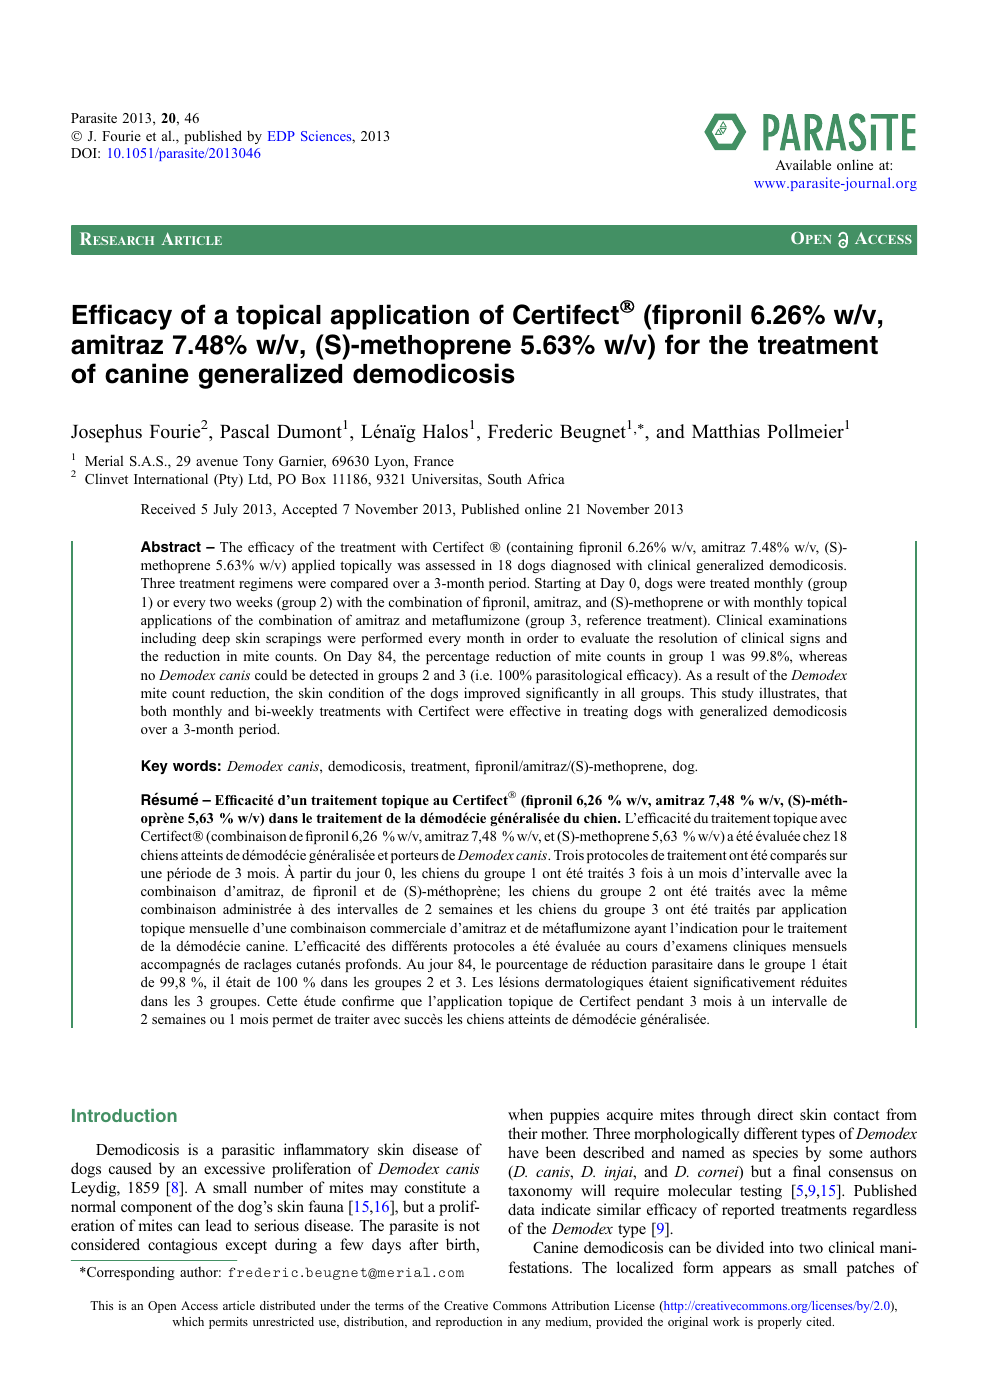 Efficacy Of A Topical Application Of Certifect Fipronil 6 26 W V Amitraz 7 48 W V S Methoprene 5 63 W V For The Treatment Of Canine Generalized Demodicosis Topic Of Research Paper In Veterinary Science